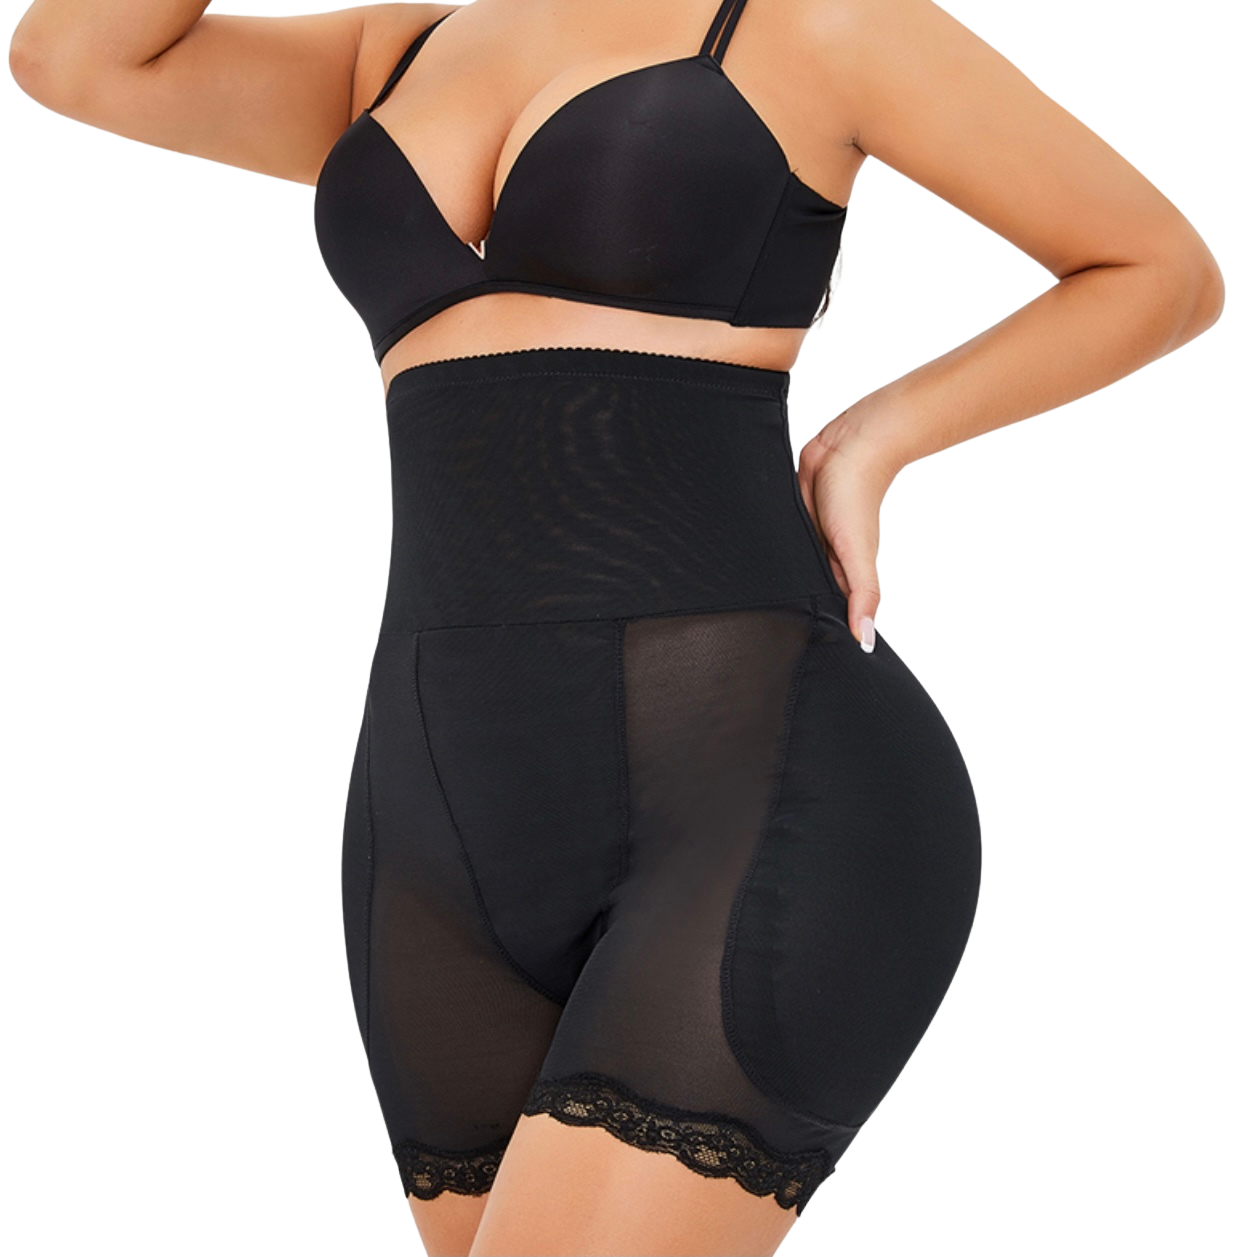 Curve short - 2 (high waist) hip/ butt pad with lace – Official